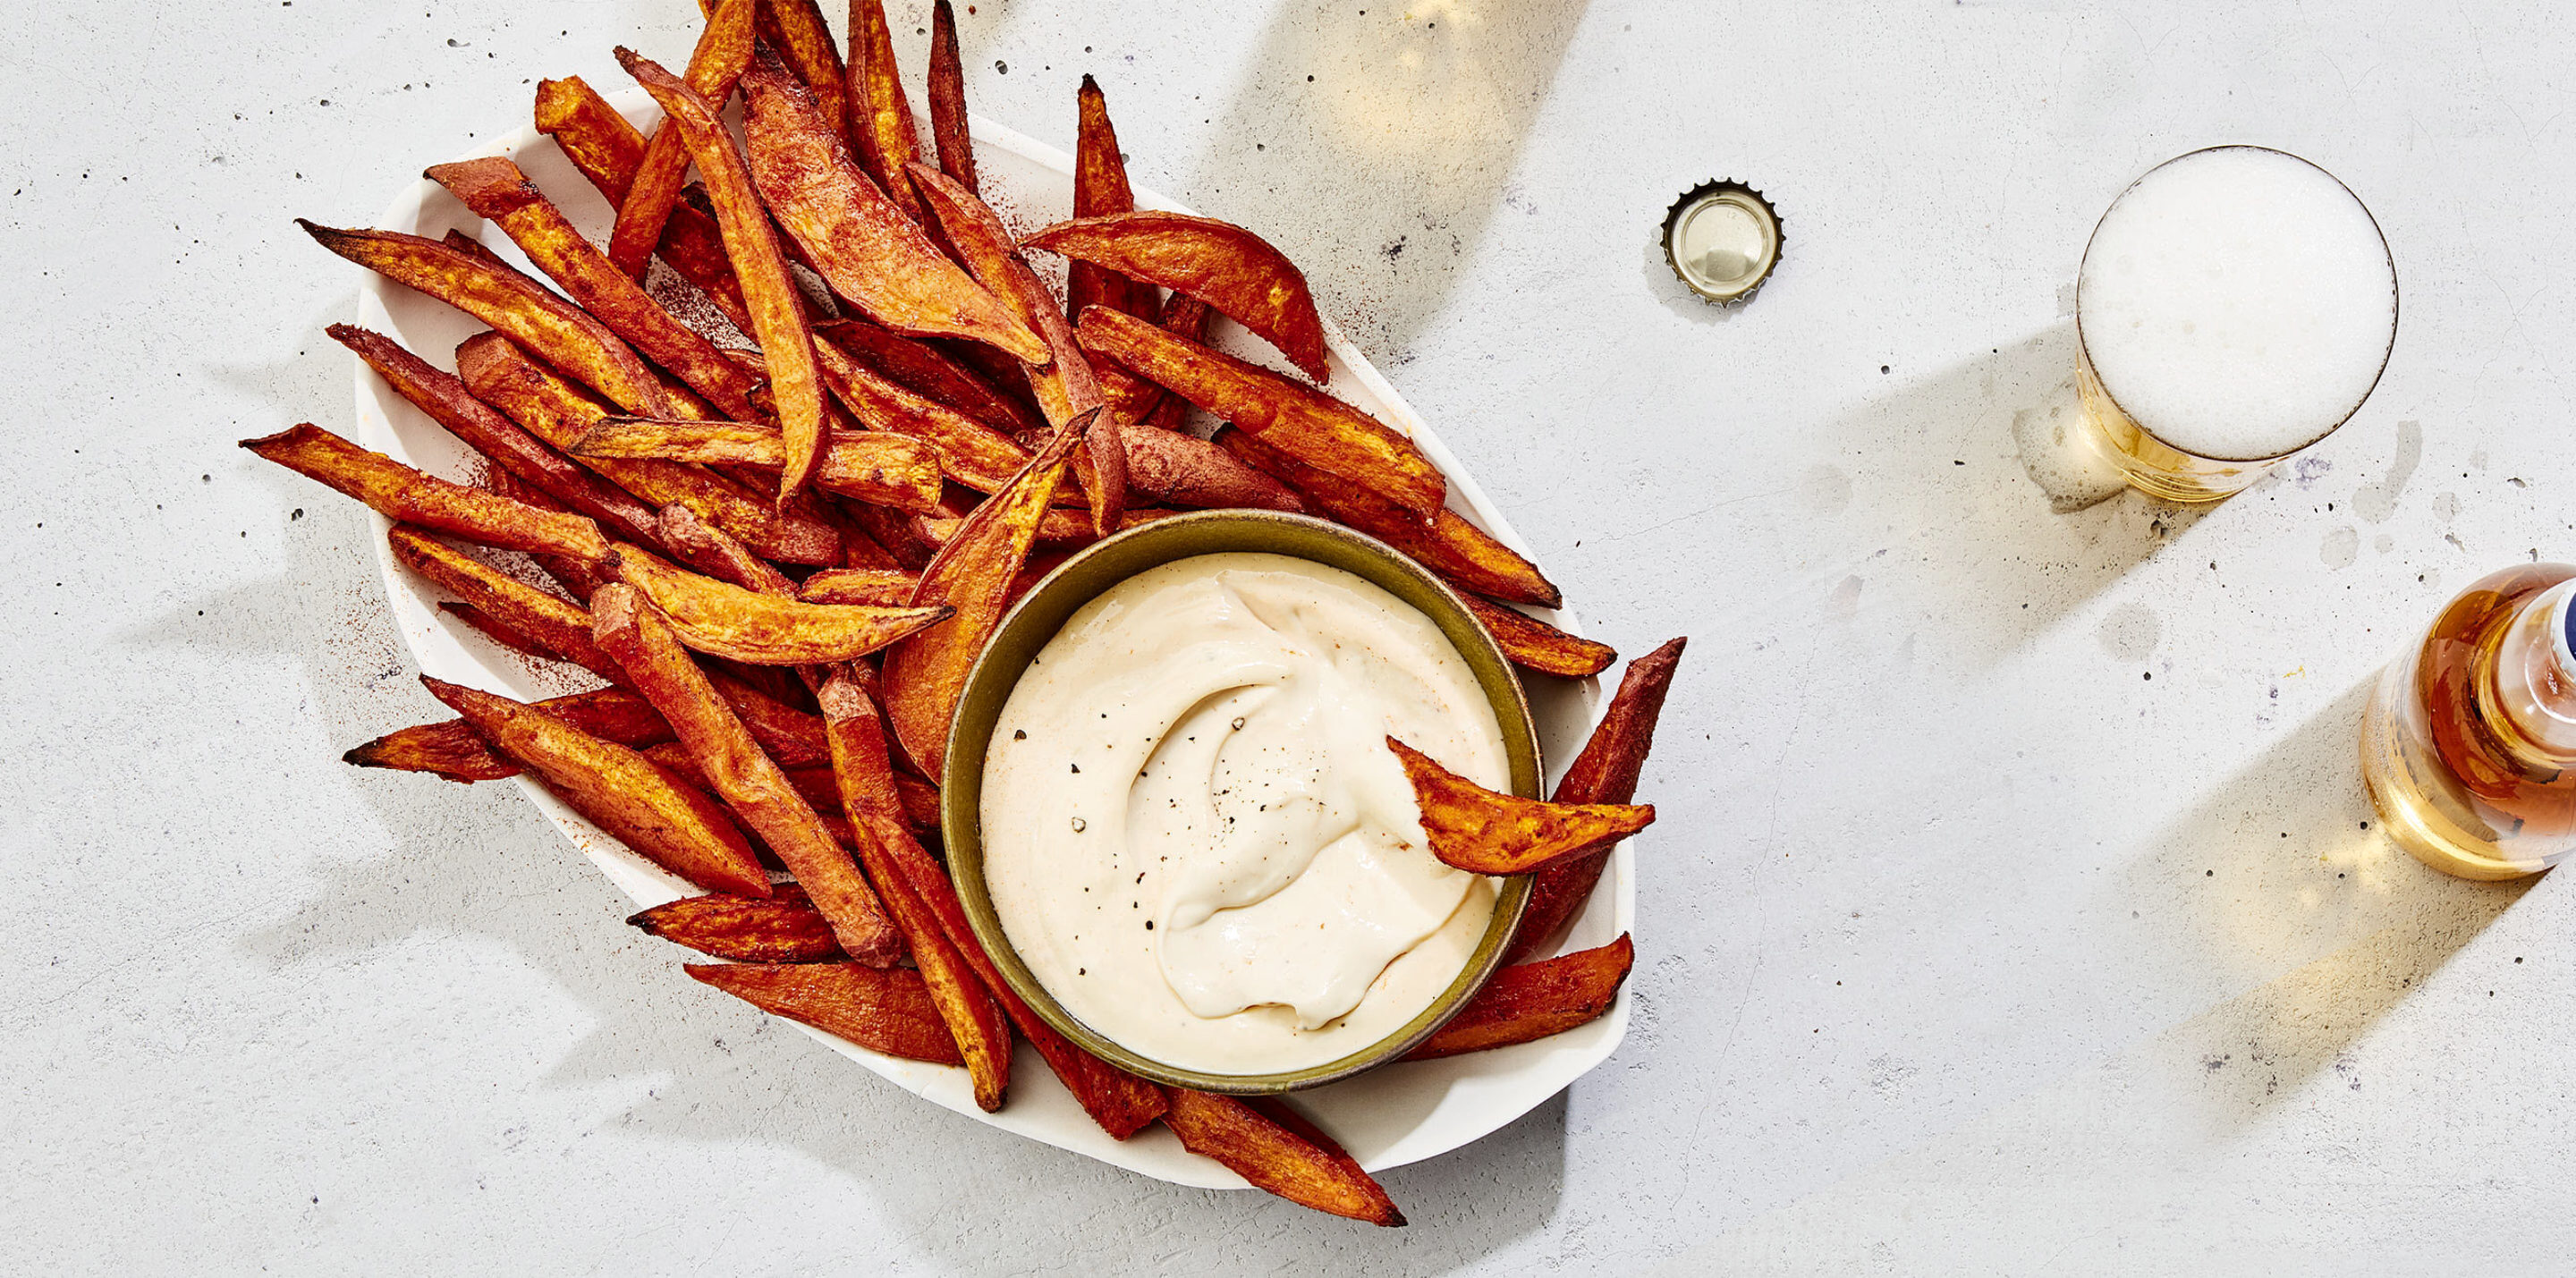 Recipe: Sweet Potato Oven Fries With Comeback Sauce